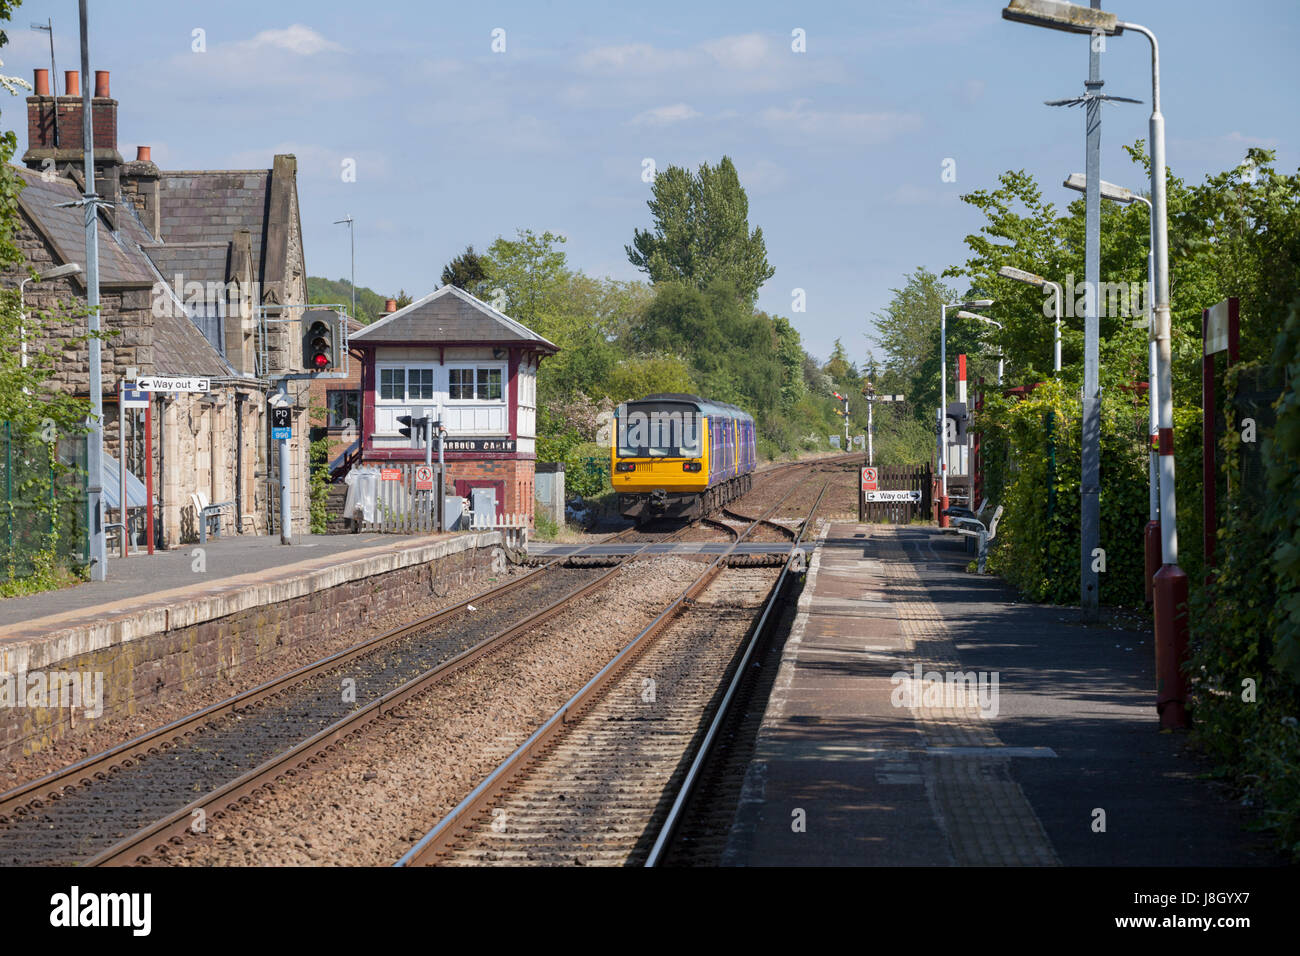 07/05/2017 Parbold Northern  Rail class 142 Pacer trains,  working a Southport - Chestertrain passing the signal box Stock Photo